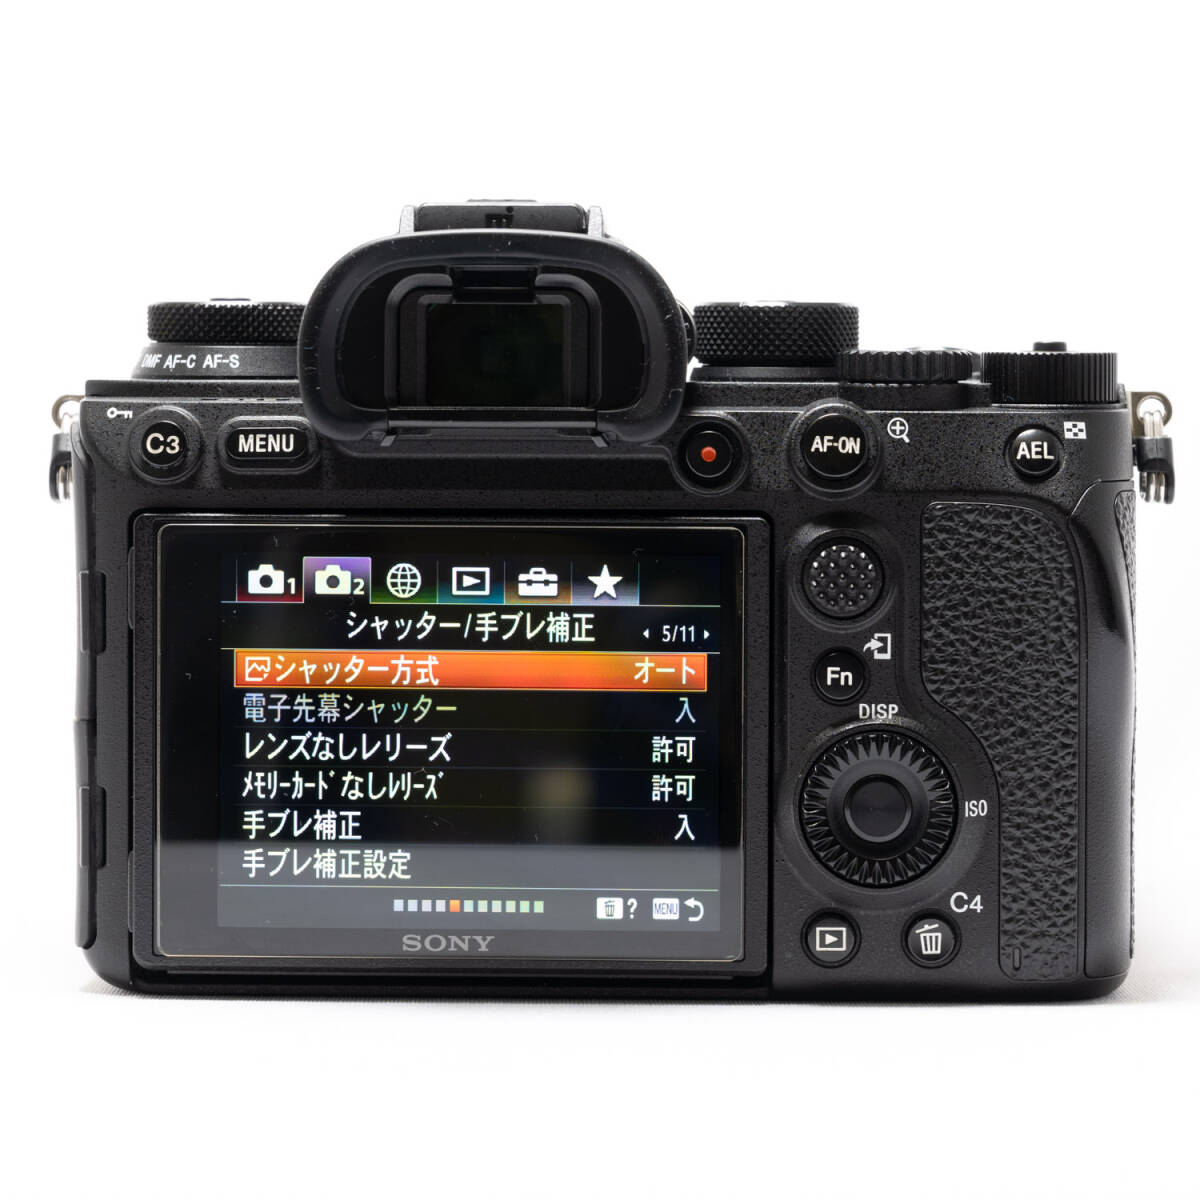 [ practical goods * beautiful goods ]SONY α9II body (ILCE-9M2) working properly goods accessory included ( control number 23)